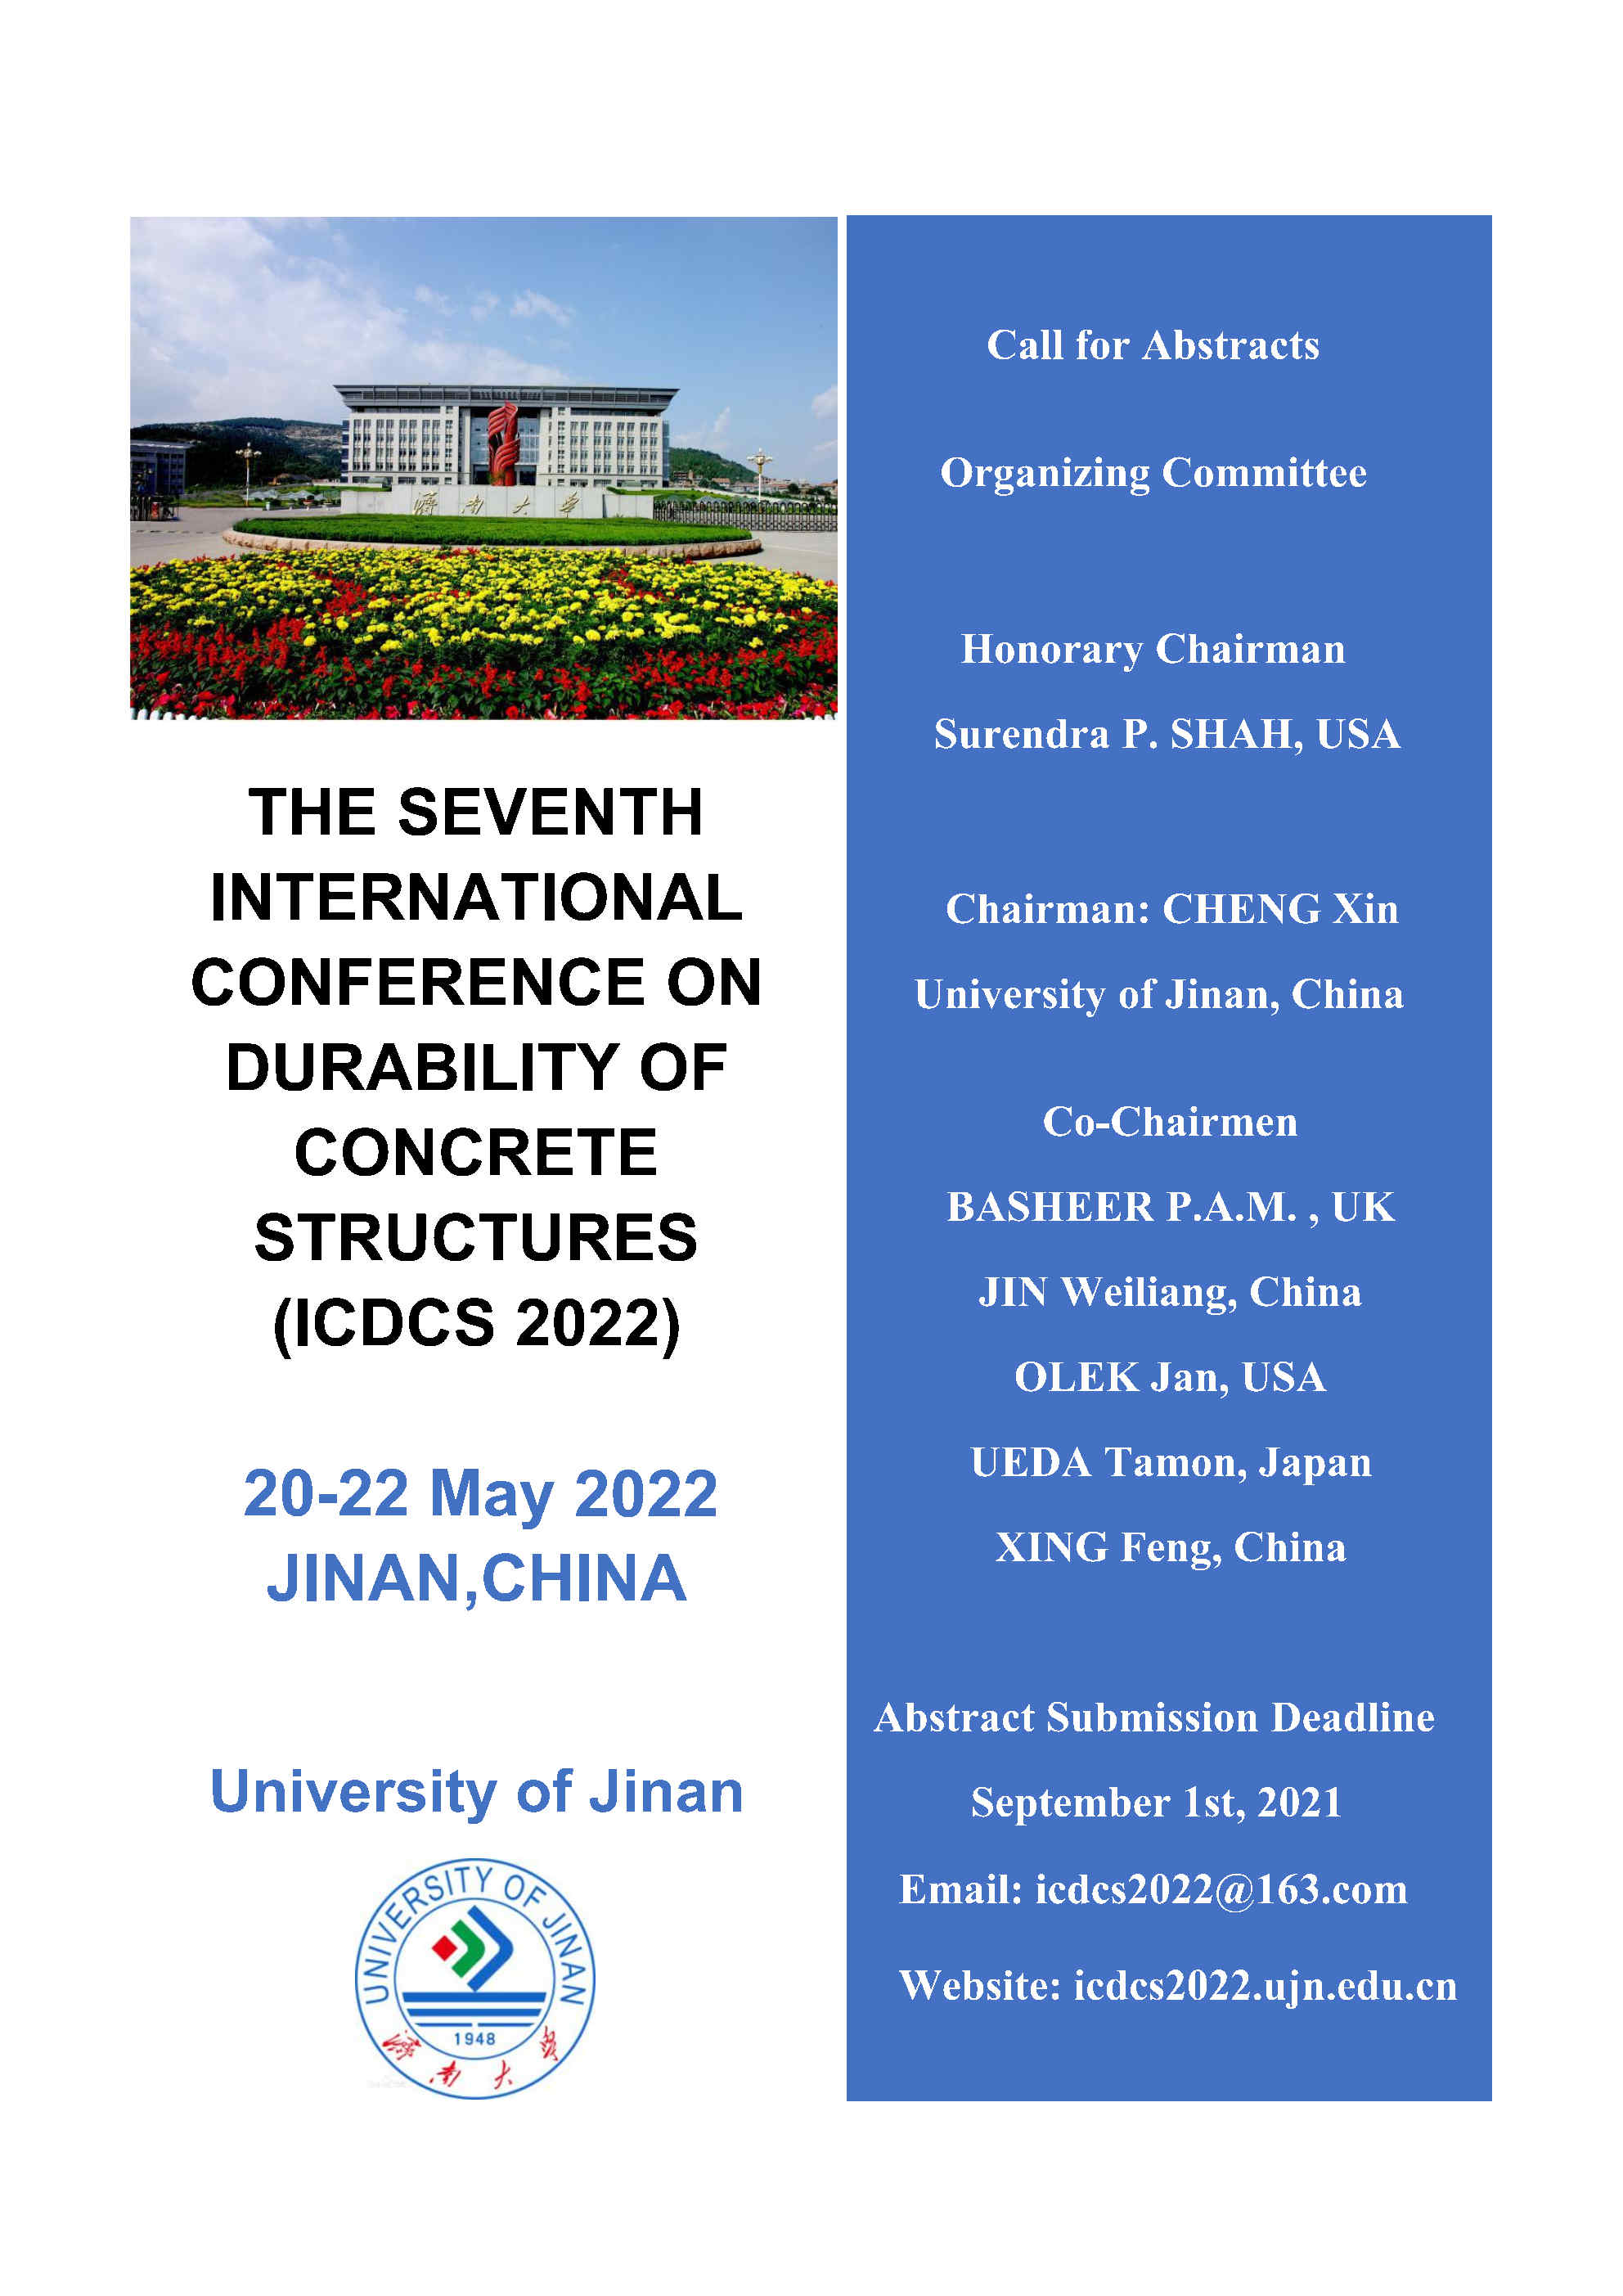 ICDCS2022 1st announcement call for abstractThe Seventh International